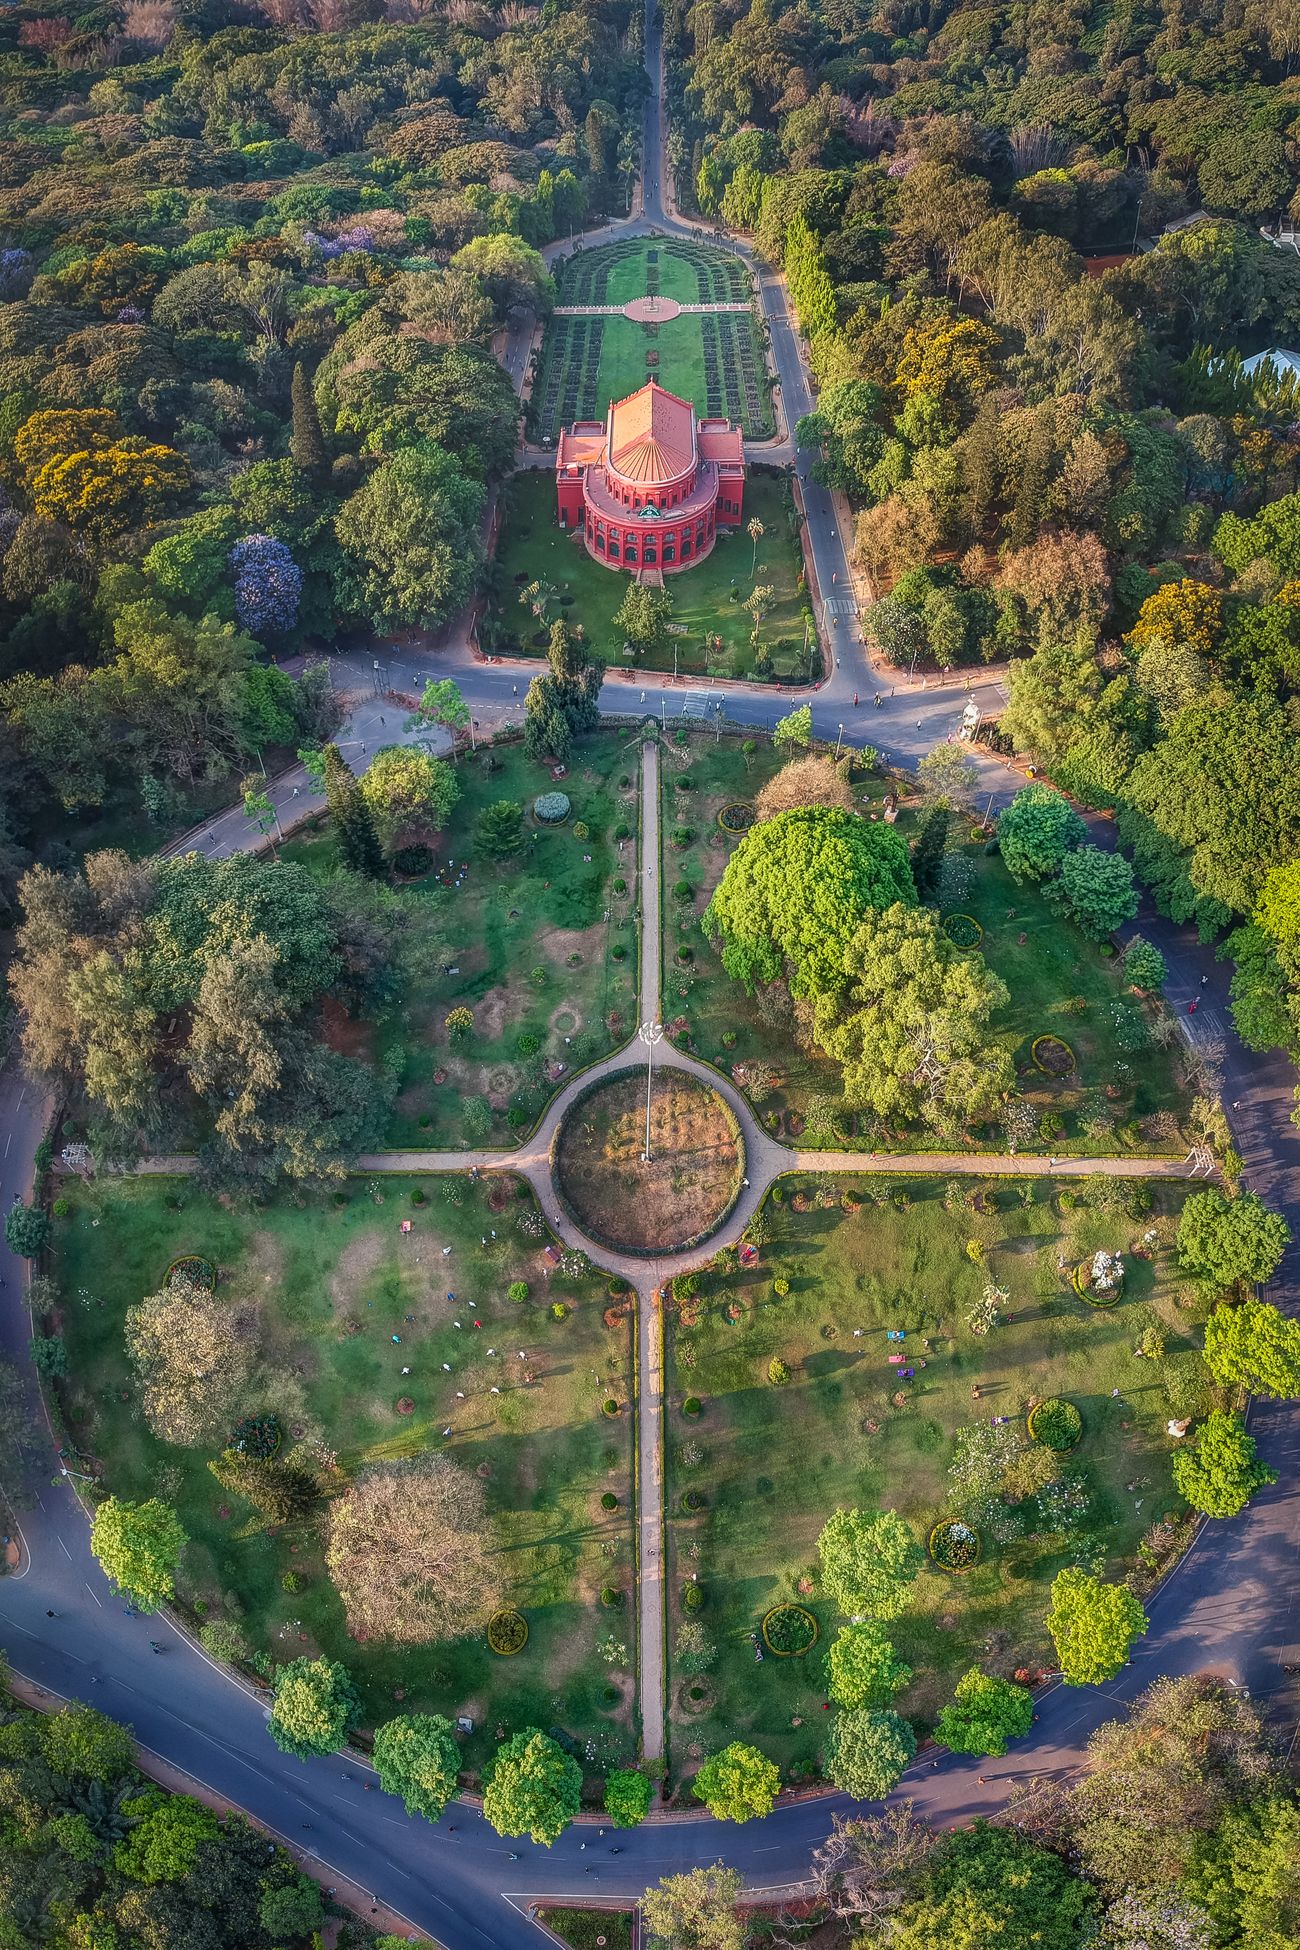 A stunning aerial view of the Karnataka State Central Library which was built in 1915 and is now located inside the lush Cubbon Park. Bengaluru’s Park Paradise, Cubbon Park, the 120-acre lush park and Bengaluru’s prime lung space, gives city slickers an opportunity to hit pause and get off. Precious moments spent there, away from the frantic pace of a thriving megalopolis are a gift a blast from the past when Bengaluru was just a sleepy cantonment town dubbed the Garden City. Lovers, both young and old, amble around with an air of cozy intimacy, shielded from an unquiet city and its throbbing aura of commerce. Others in the pursuit of fitness limber up in the green environs, while groups of young students pore over books or just bat the breeze to get some respite from the rat race. When visiting Bengaluru, do not forget to take a walk in the park, especially when the soft evening light drapes it in an ethereal glow 